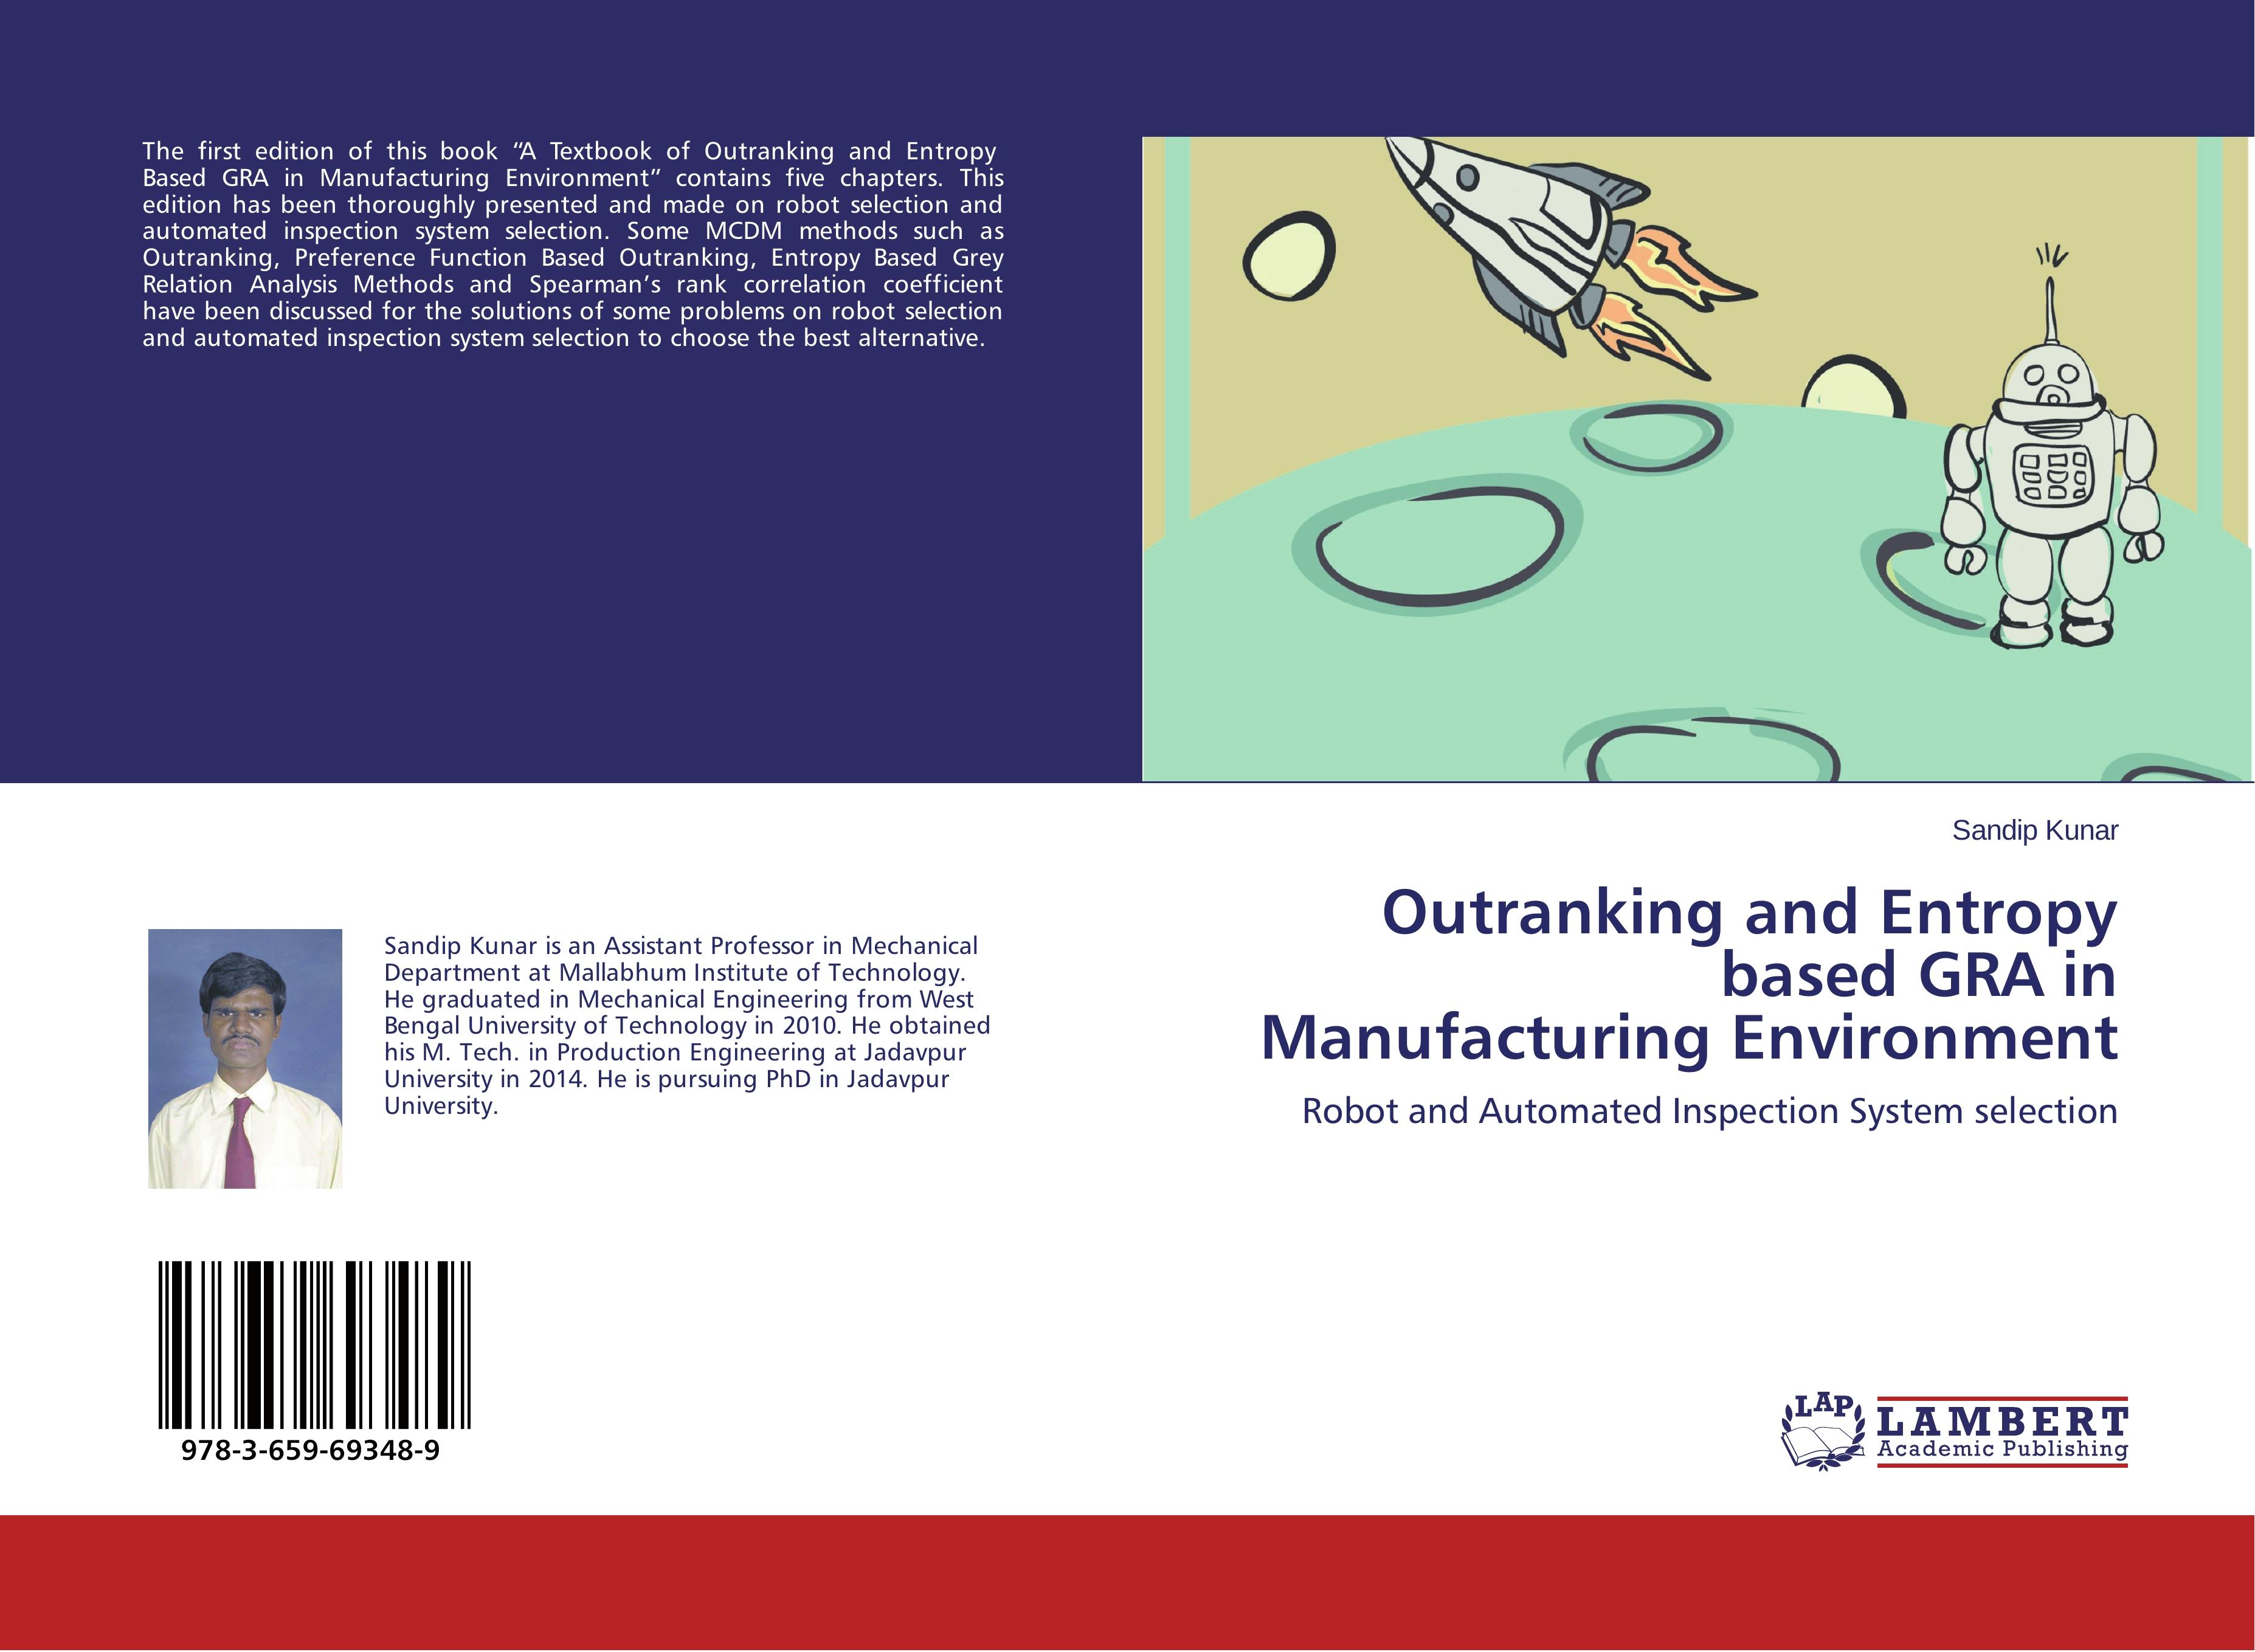 Outranking and Entropy based GRA in Manufacturing Environment - Sandip Kunar